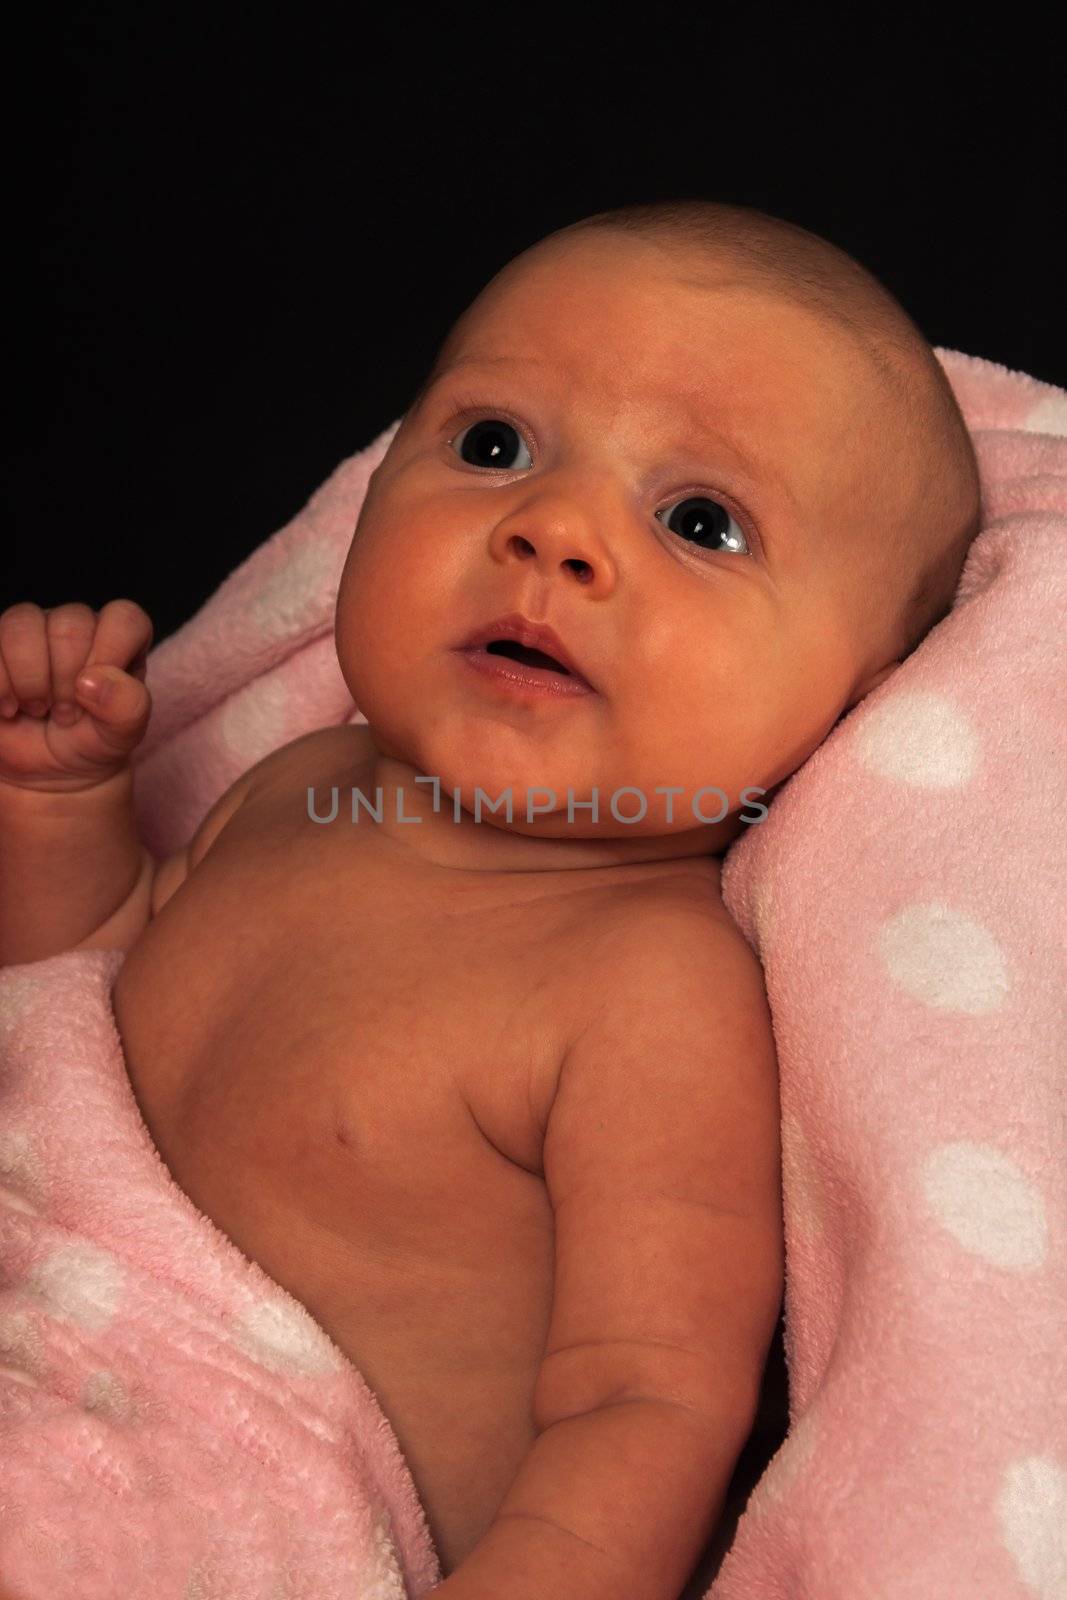 infant wrapped in a blanket on a black background.